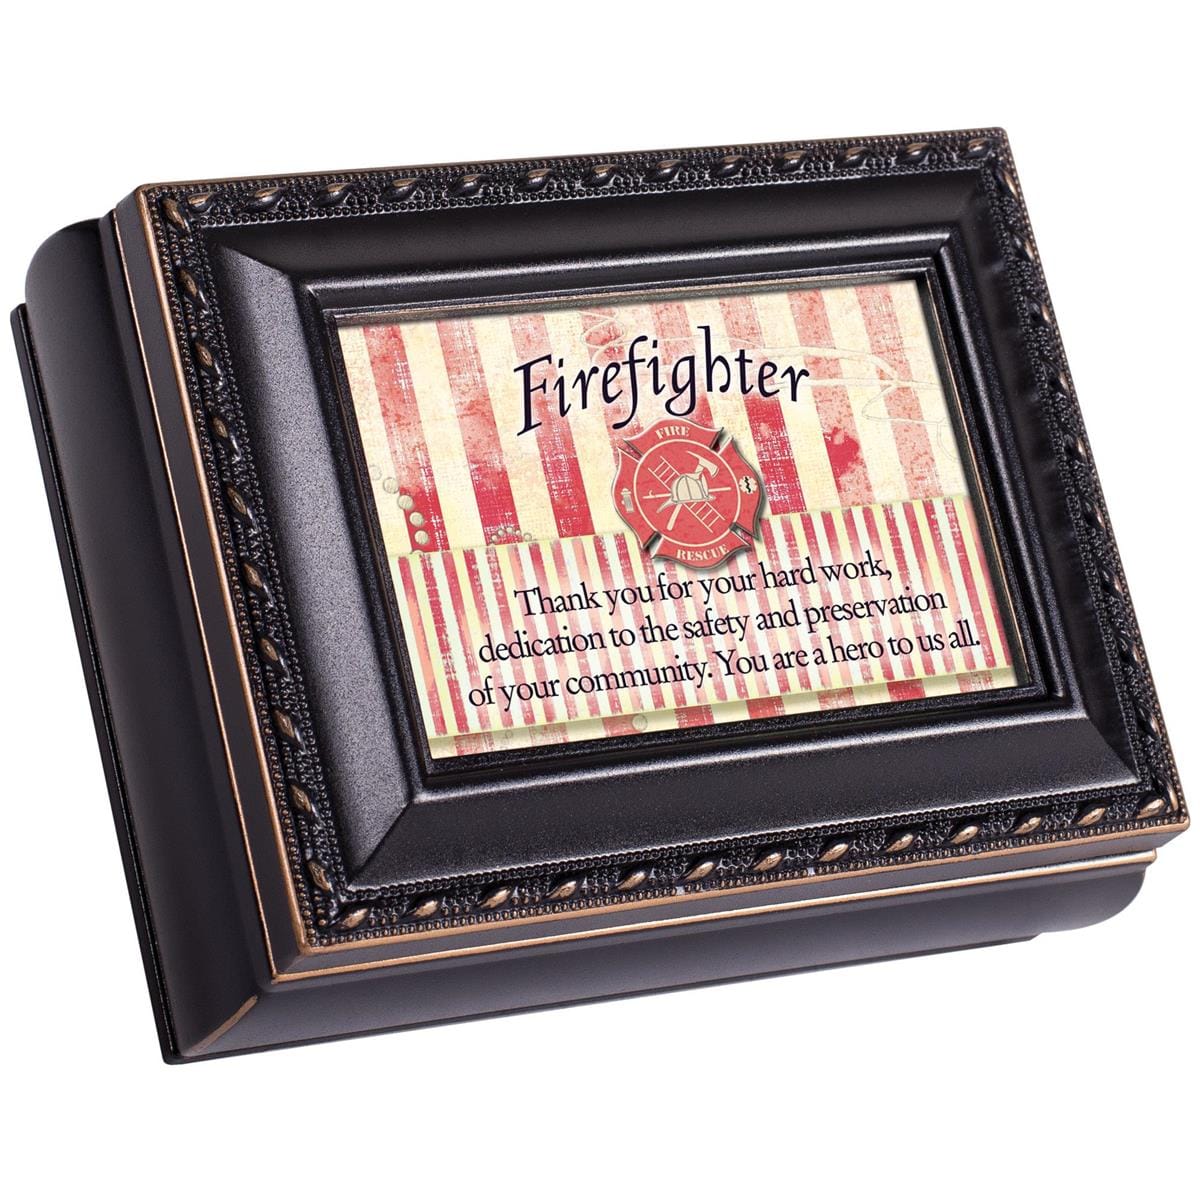 Cottage Garden Desk Decor Firefighter - Thank You For Your Service